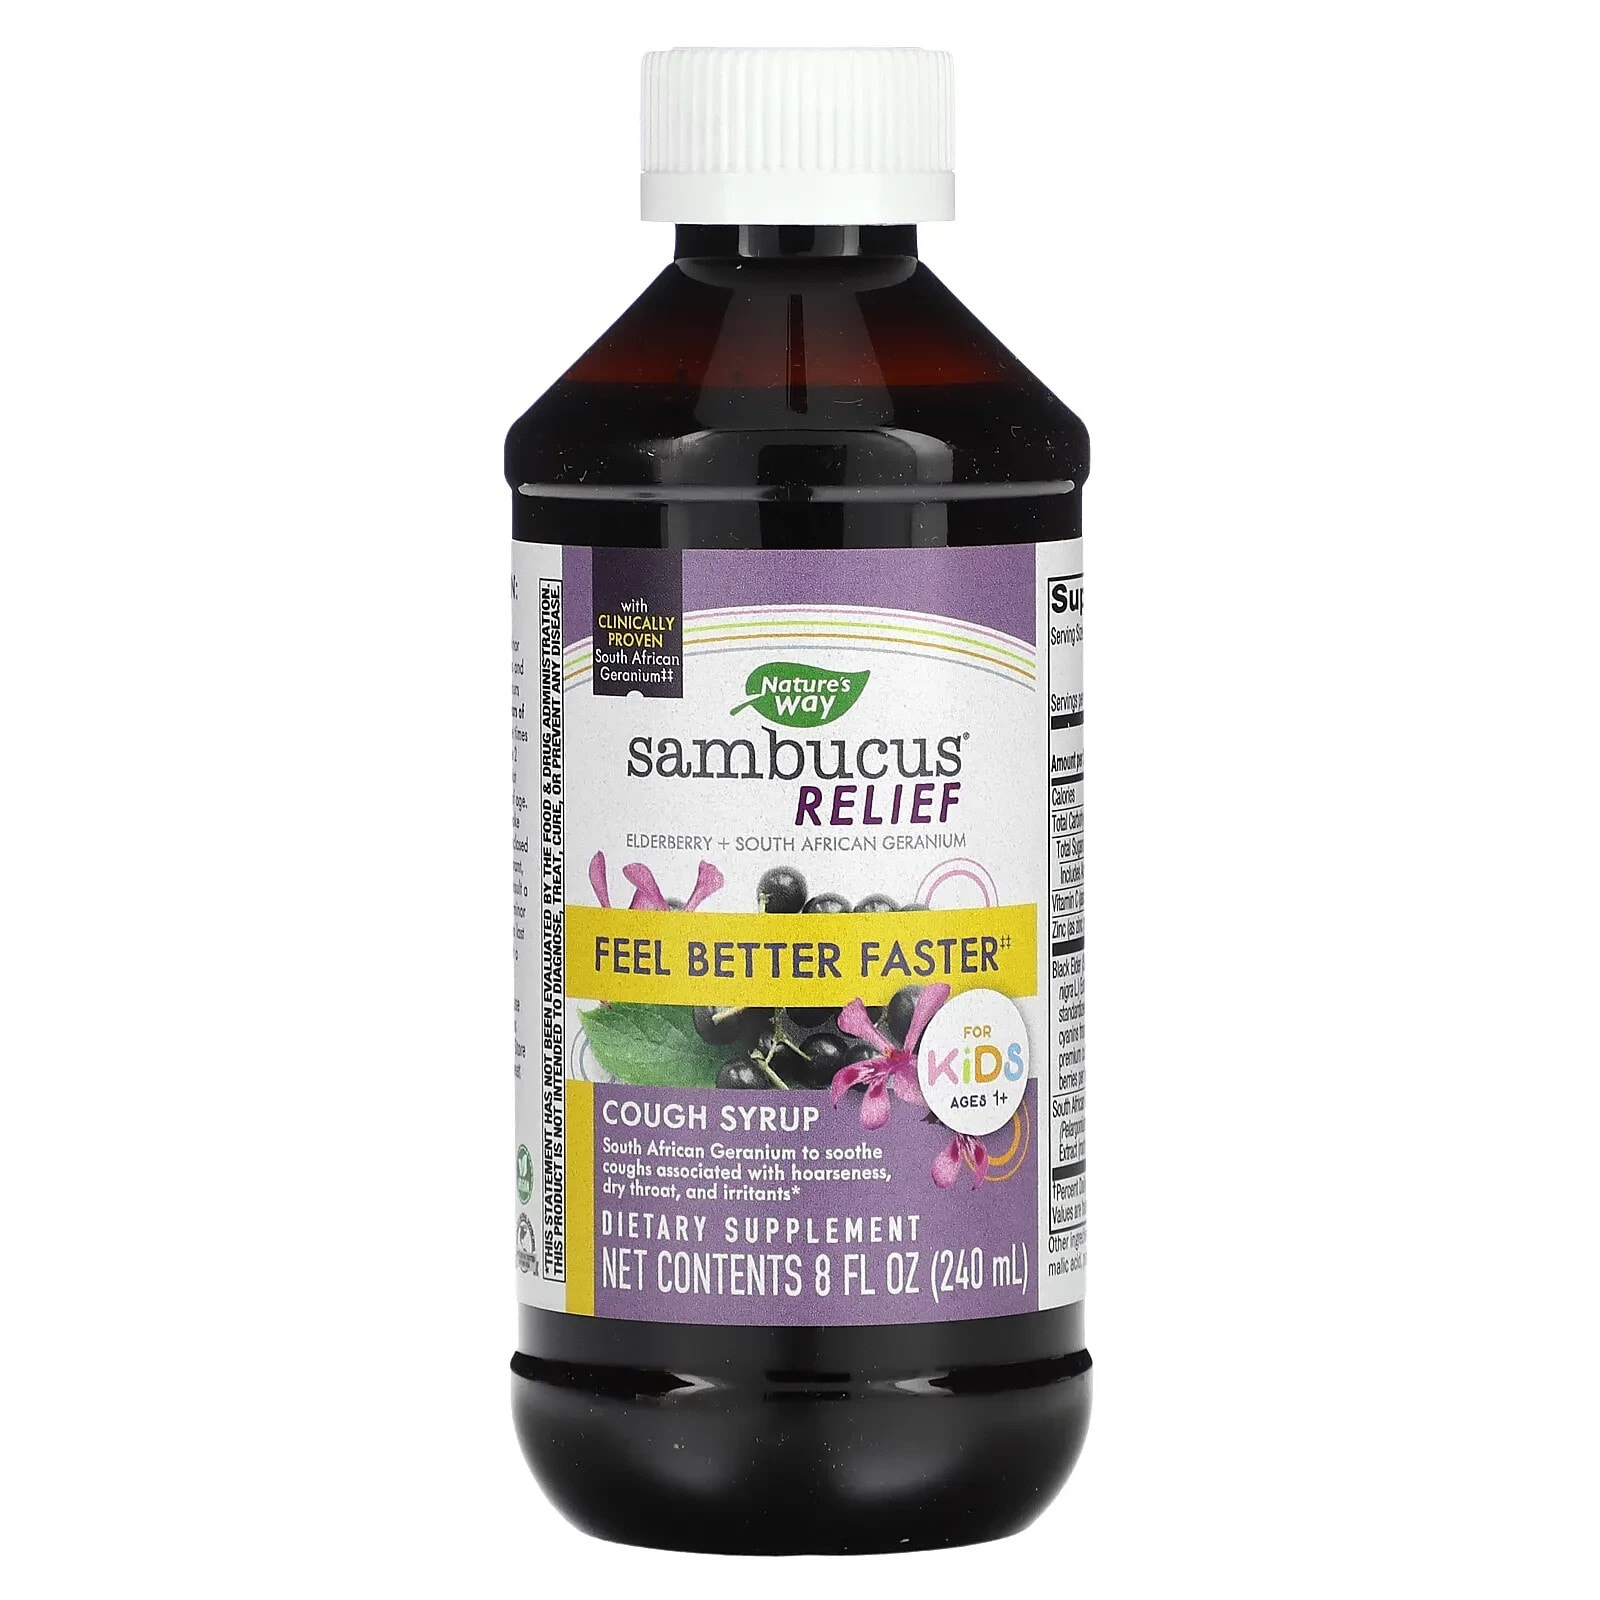 Sambucus Relief, Cough Syrup, For Kids, Ages 1+, 8 fl oz (240 ml)